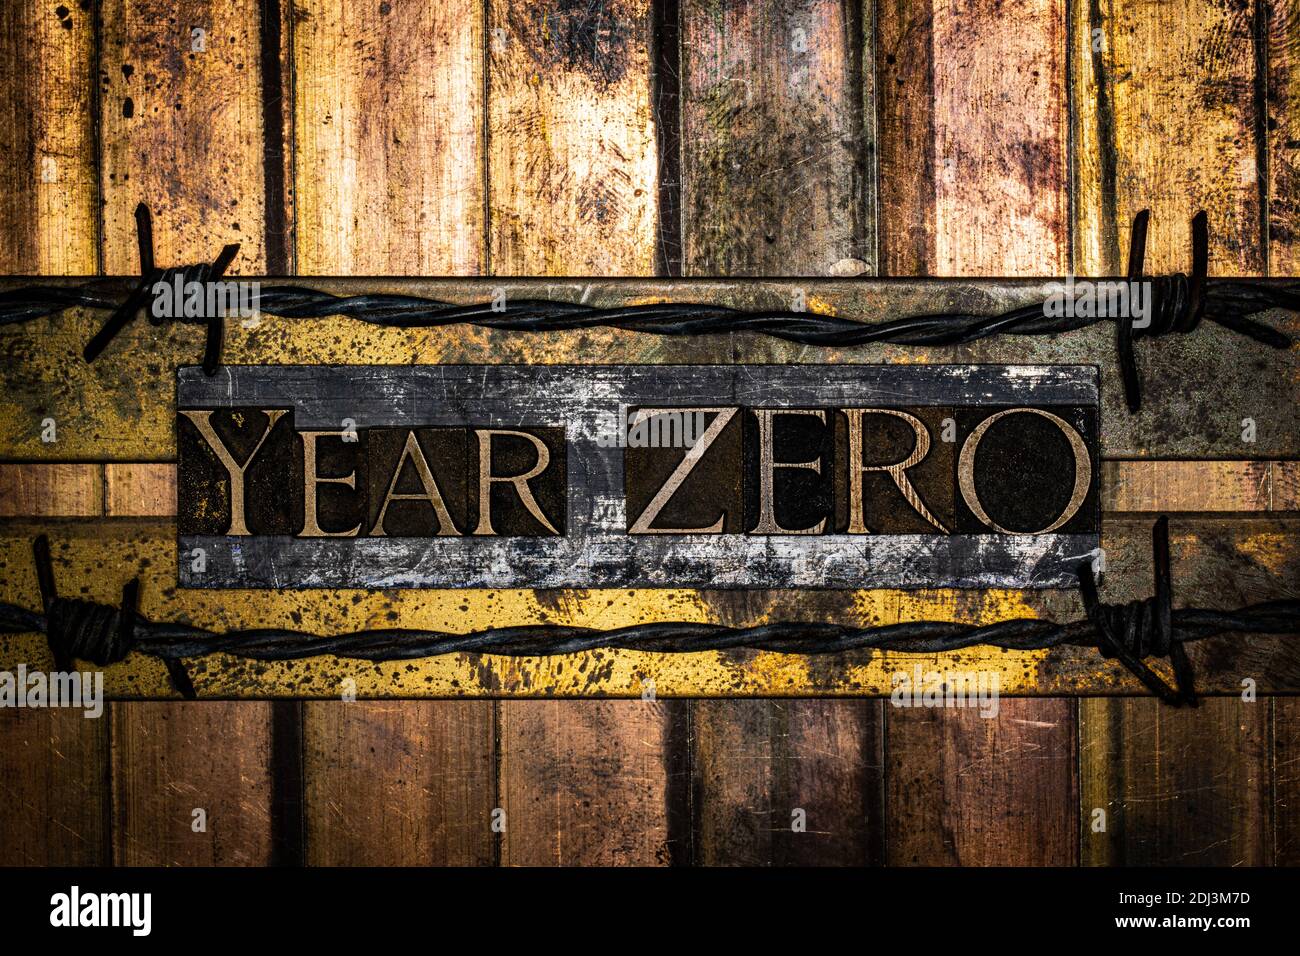 Year Zero text on vintage textured bronze grunge copper and gold background Stock Photo